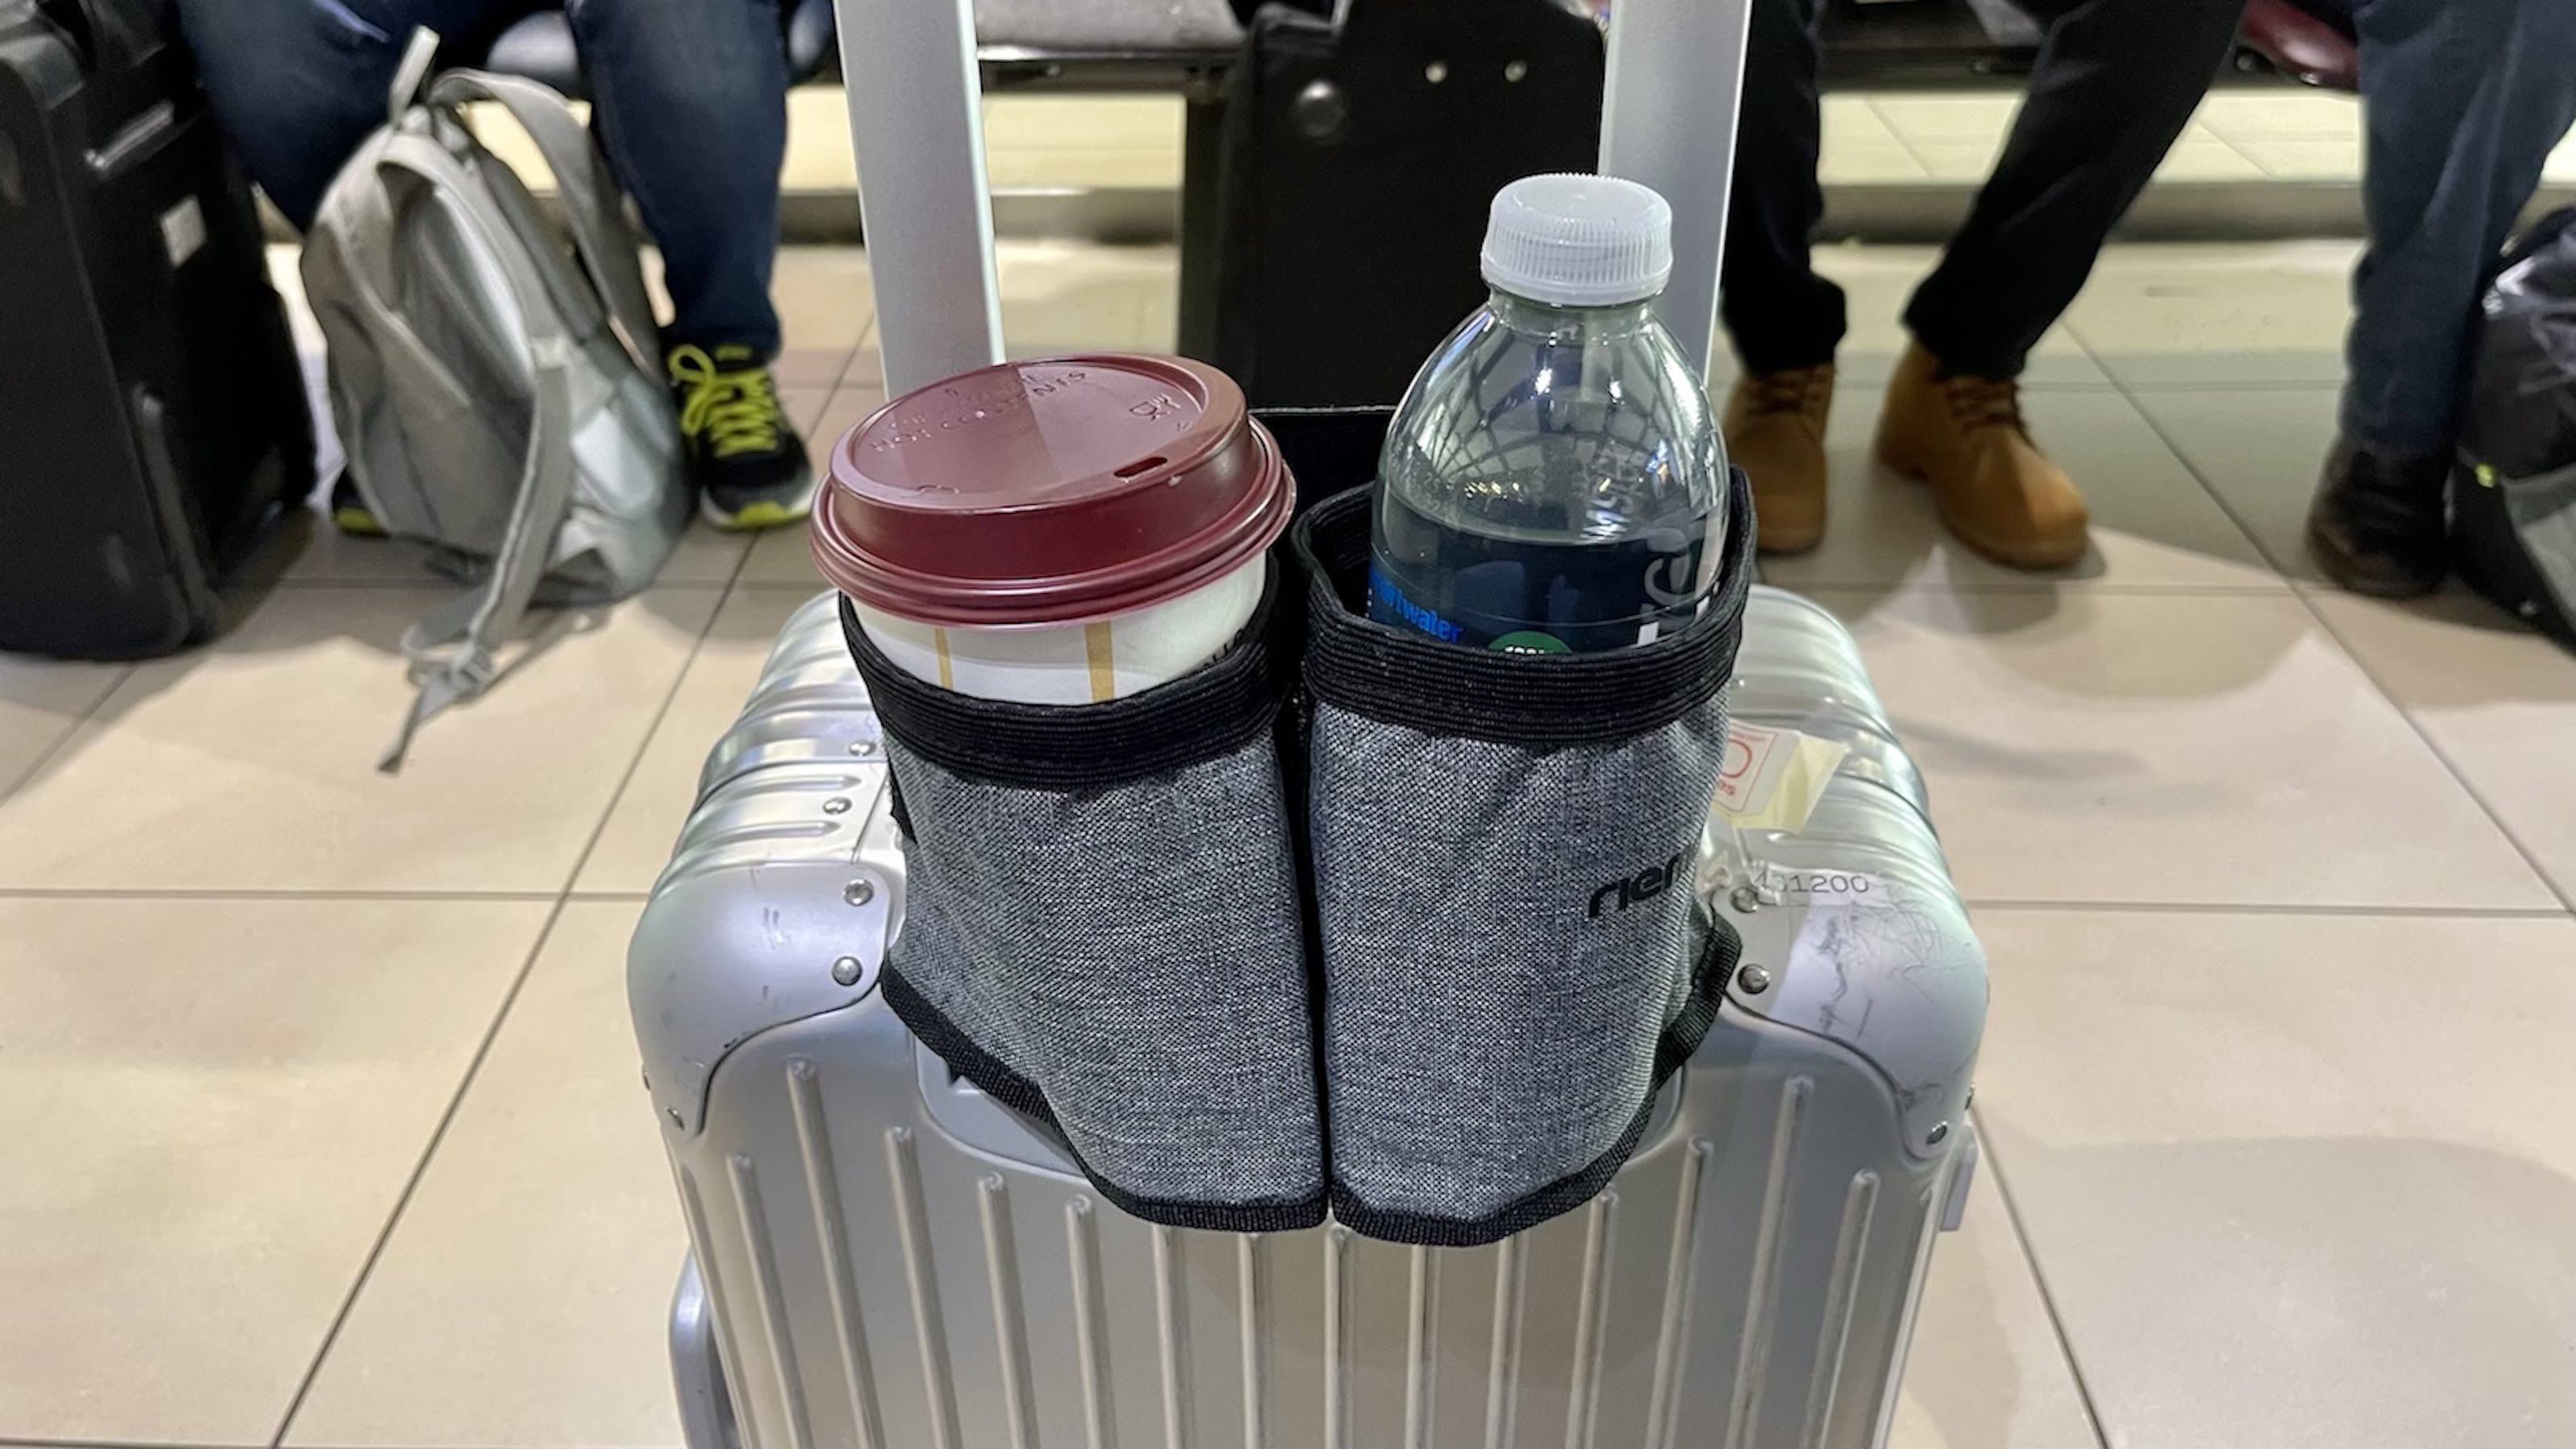 NEW! Luggage Travel Cup Holder Attachment for Suitcase Drink Carrier Caddy,  Coff